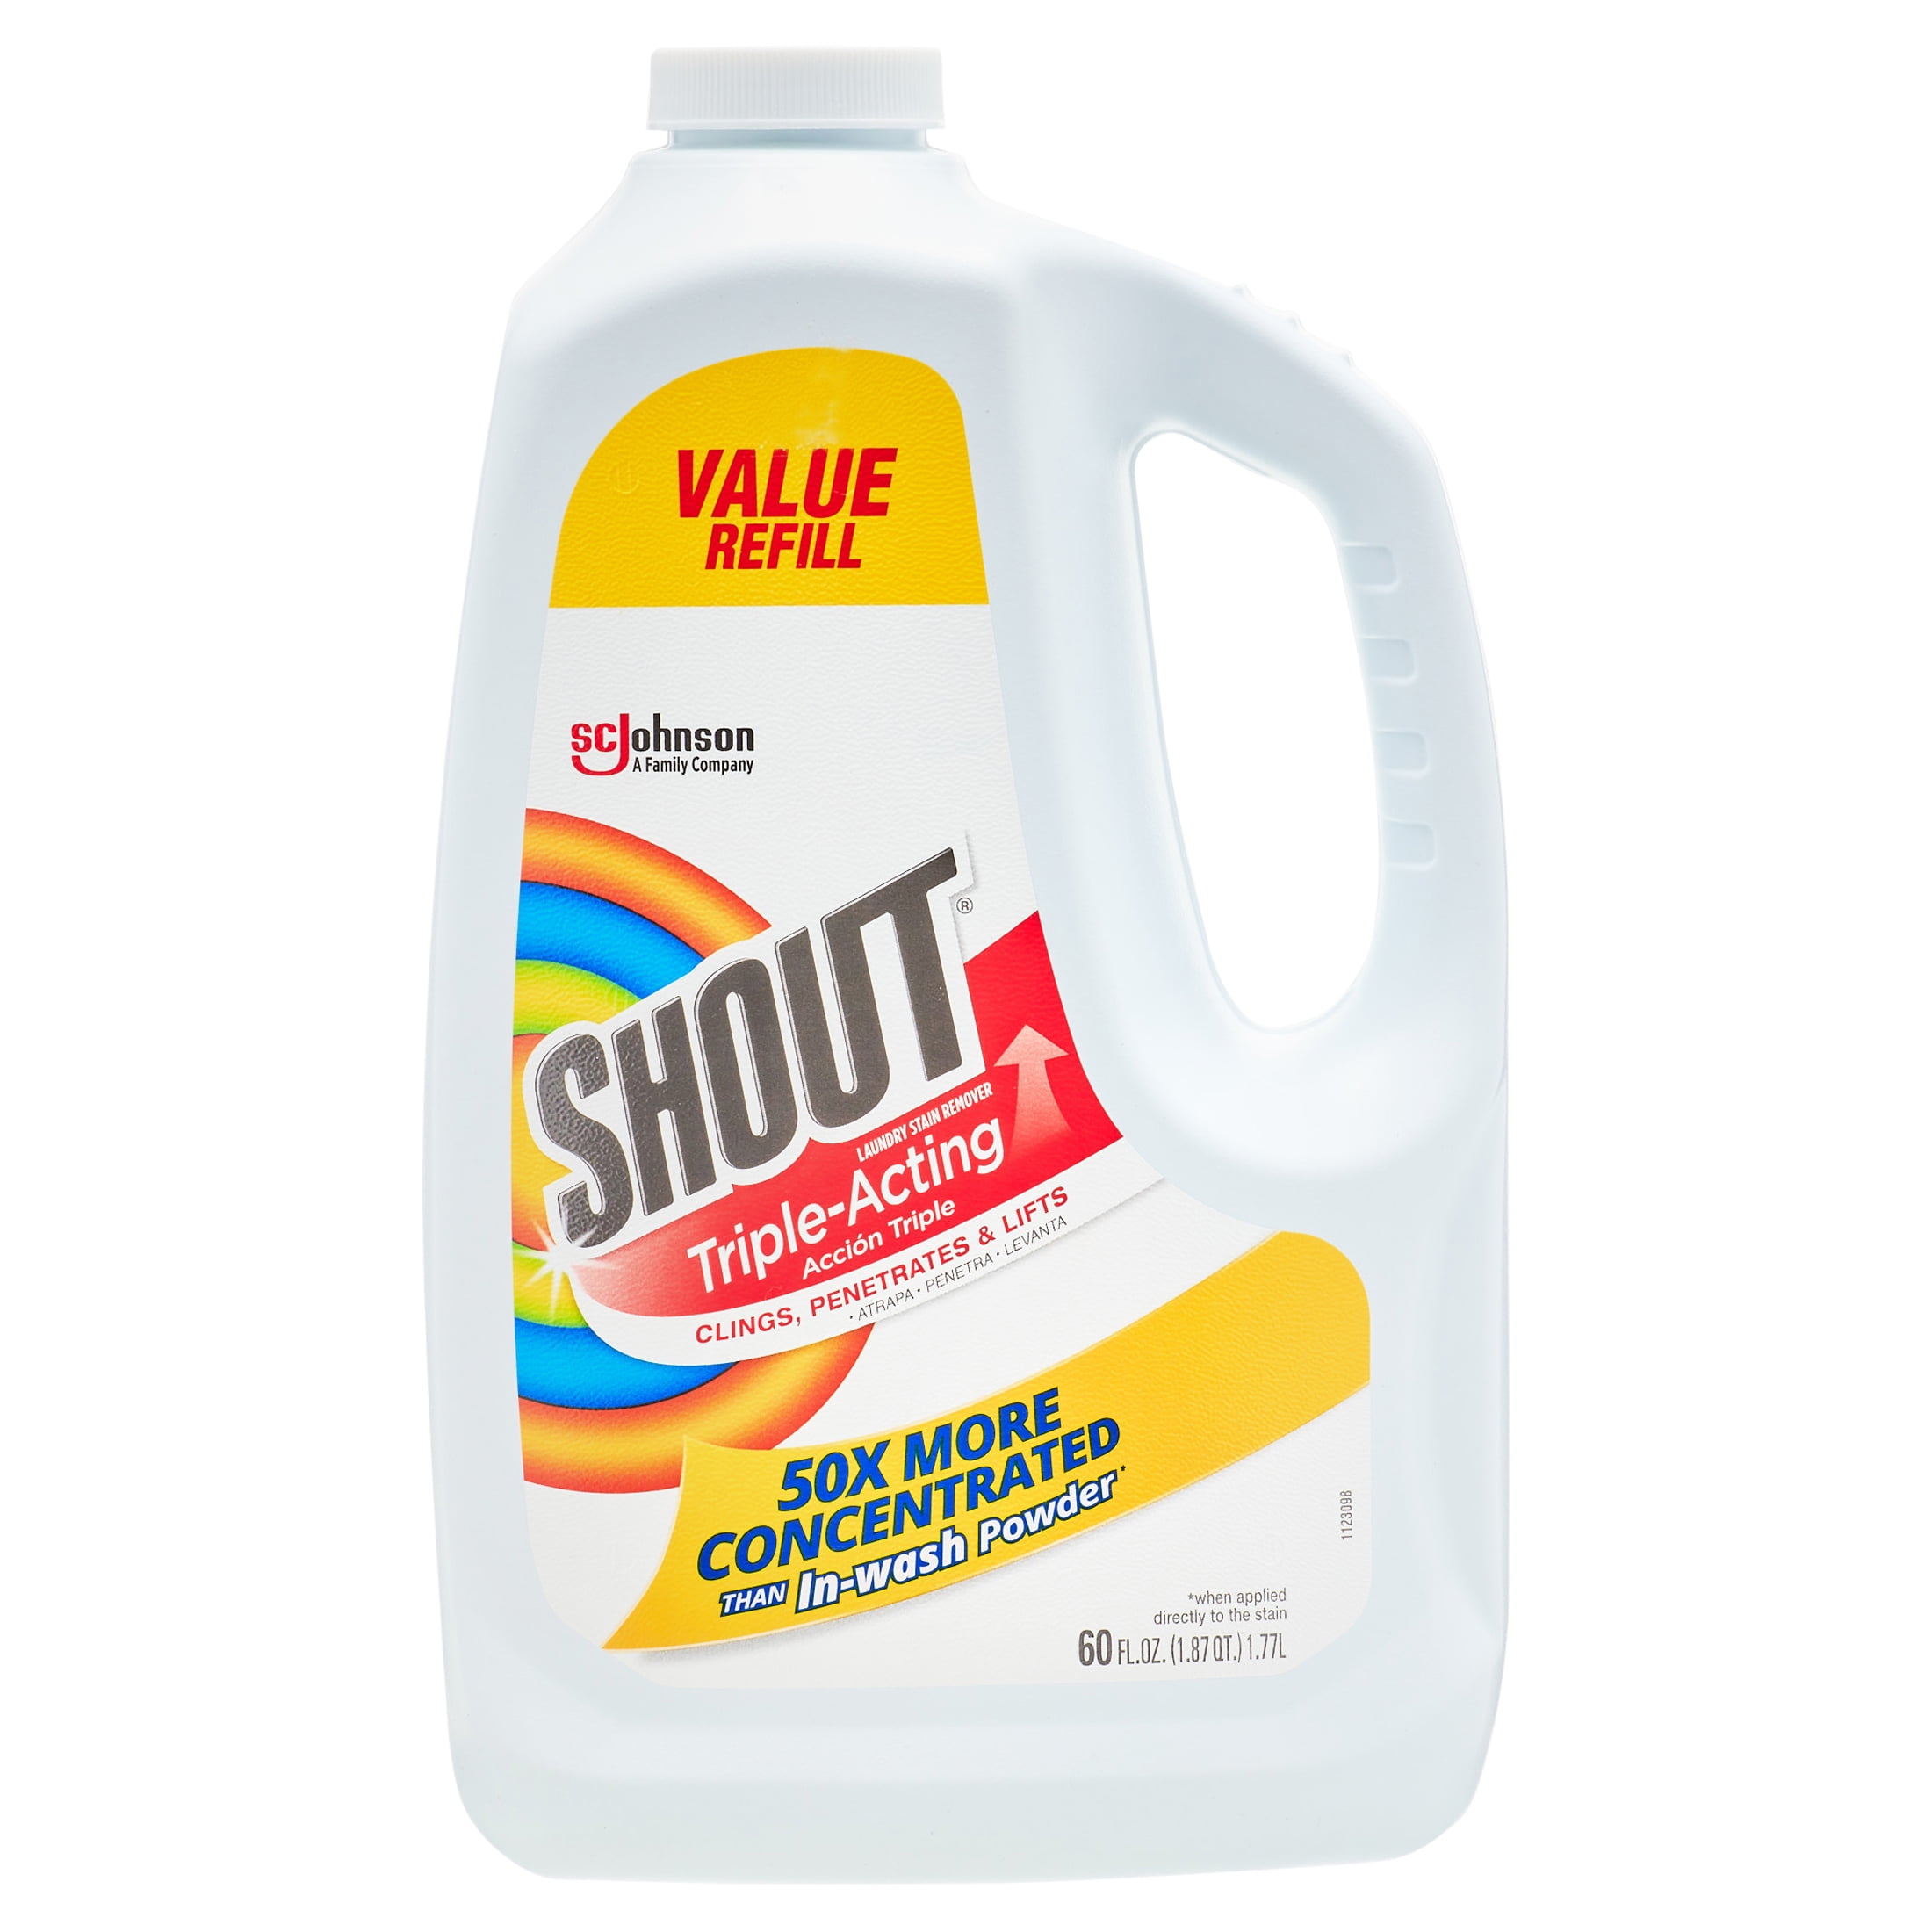 IRVINE, CA - January 11, 2013: A 60 oz refill bottle of Shout Laundry Stain  Remover. Shout products are designed to help remove stains from clothing  Stock Photo - Alamy